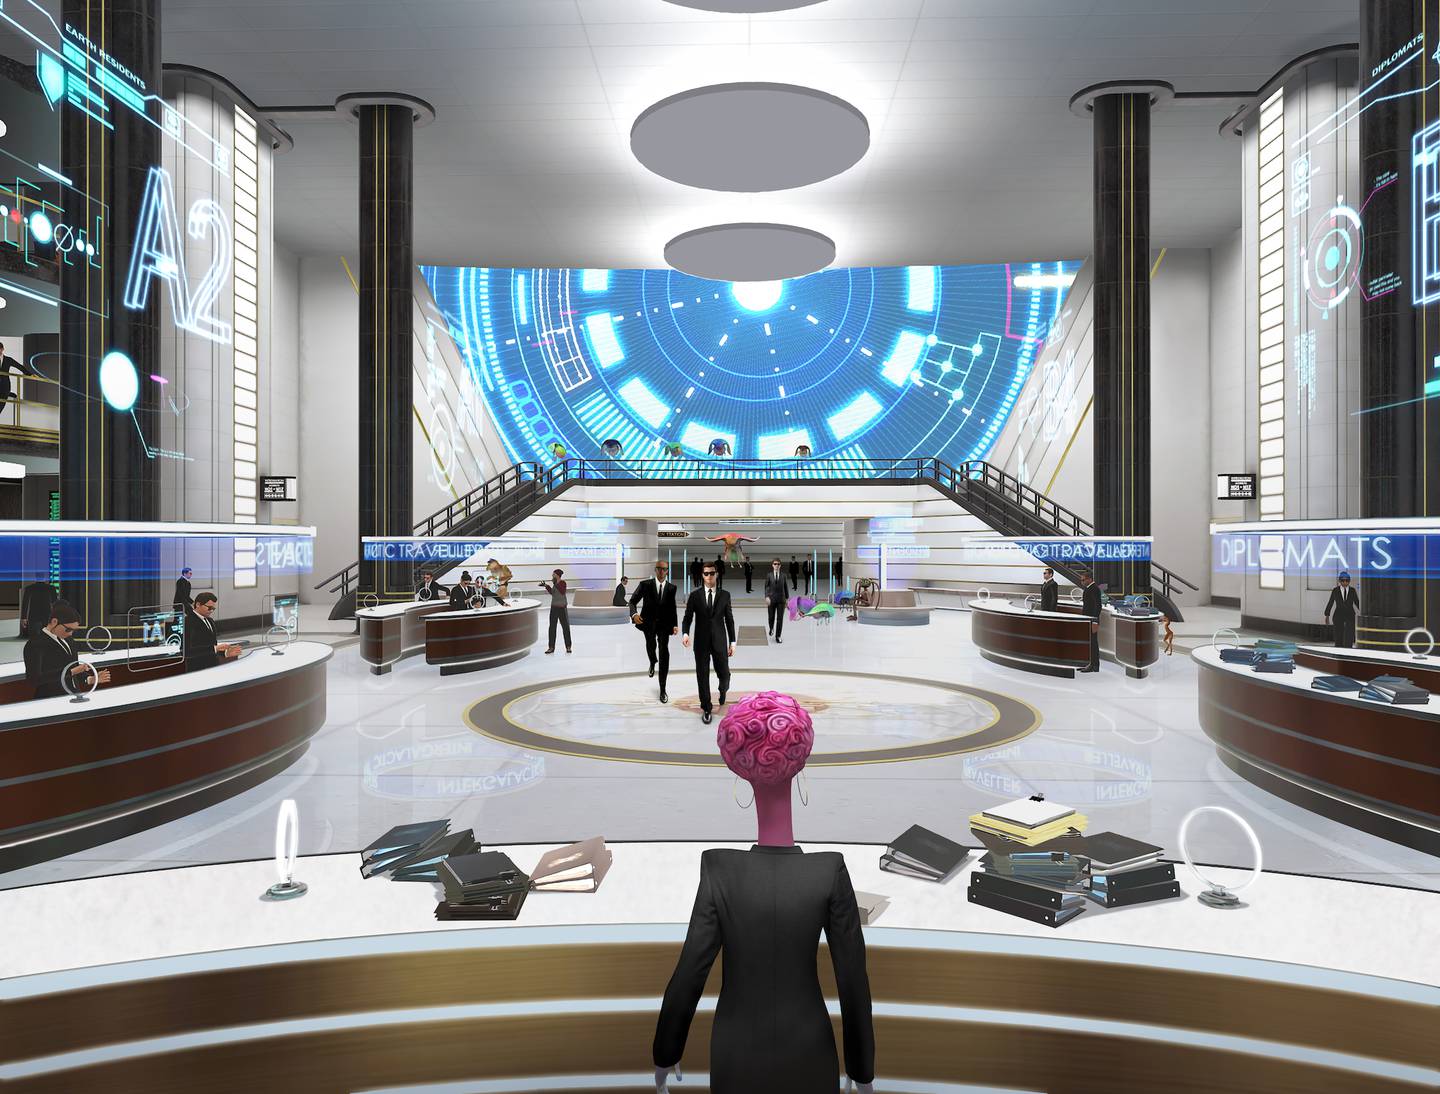 The beginning of the VR adventure 'MIB: First Assignment' takes you to the MIB headquarters and be given an assignment briefing on the Zarthanian rescue mission.